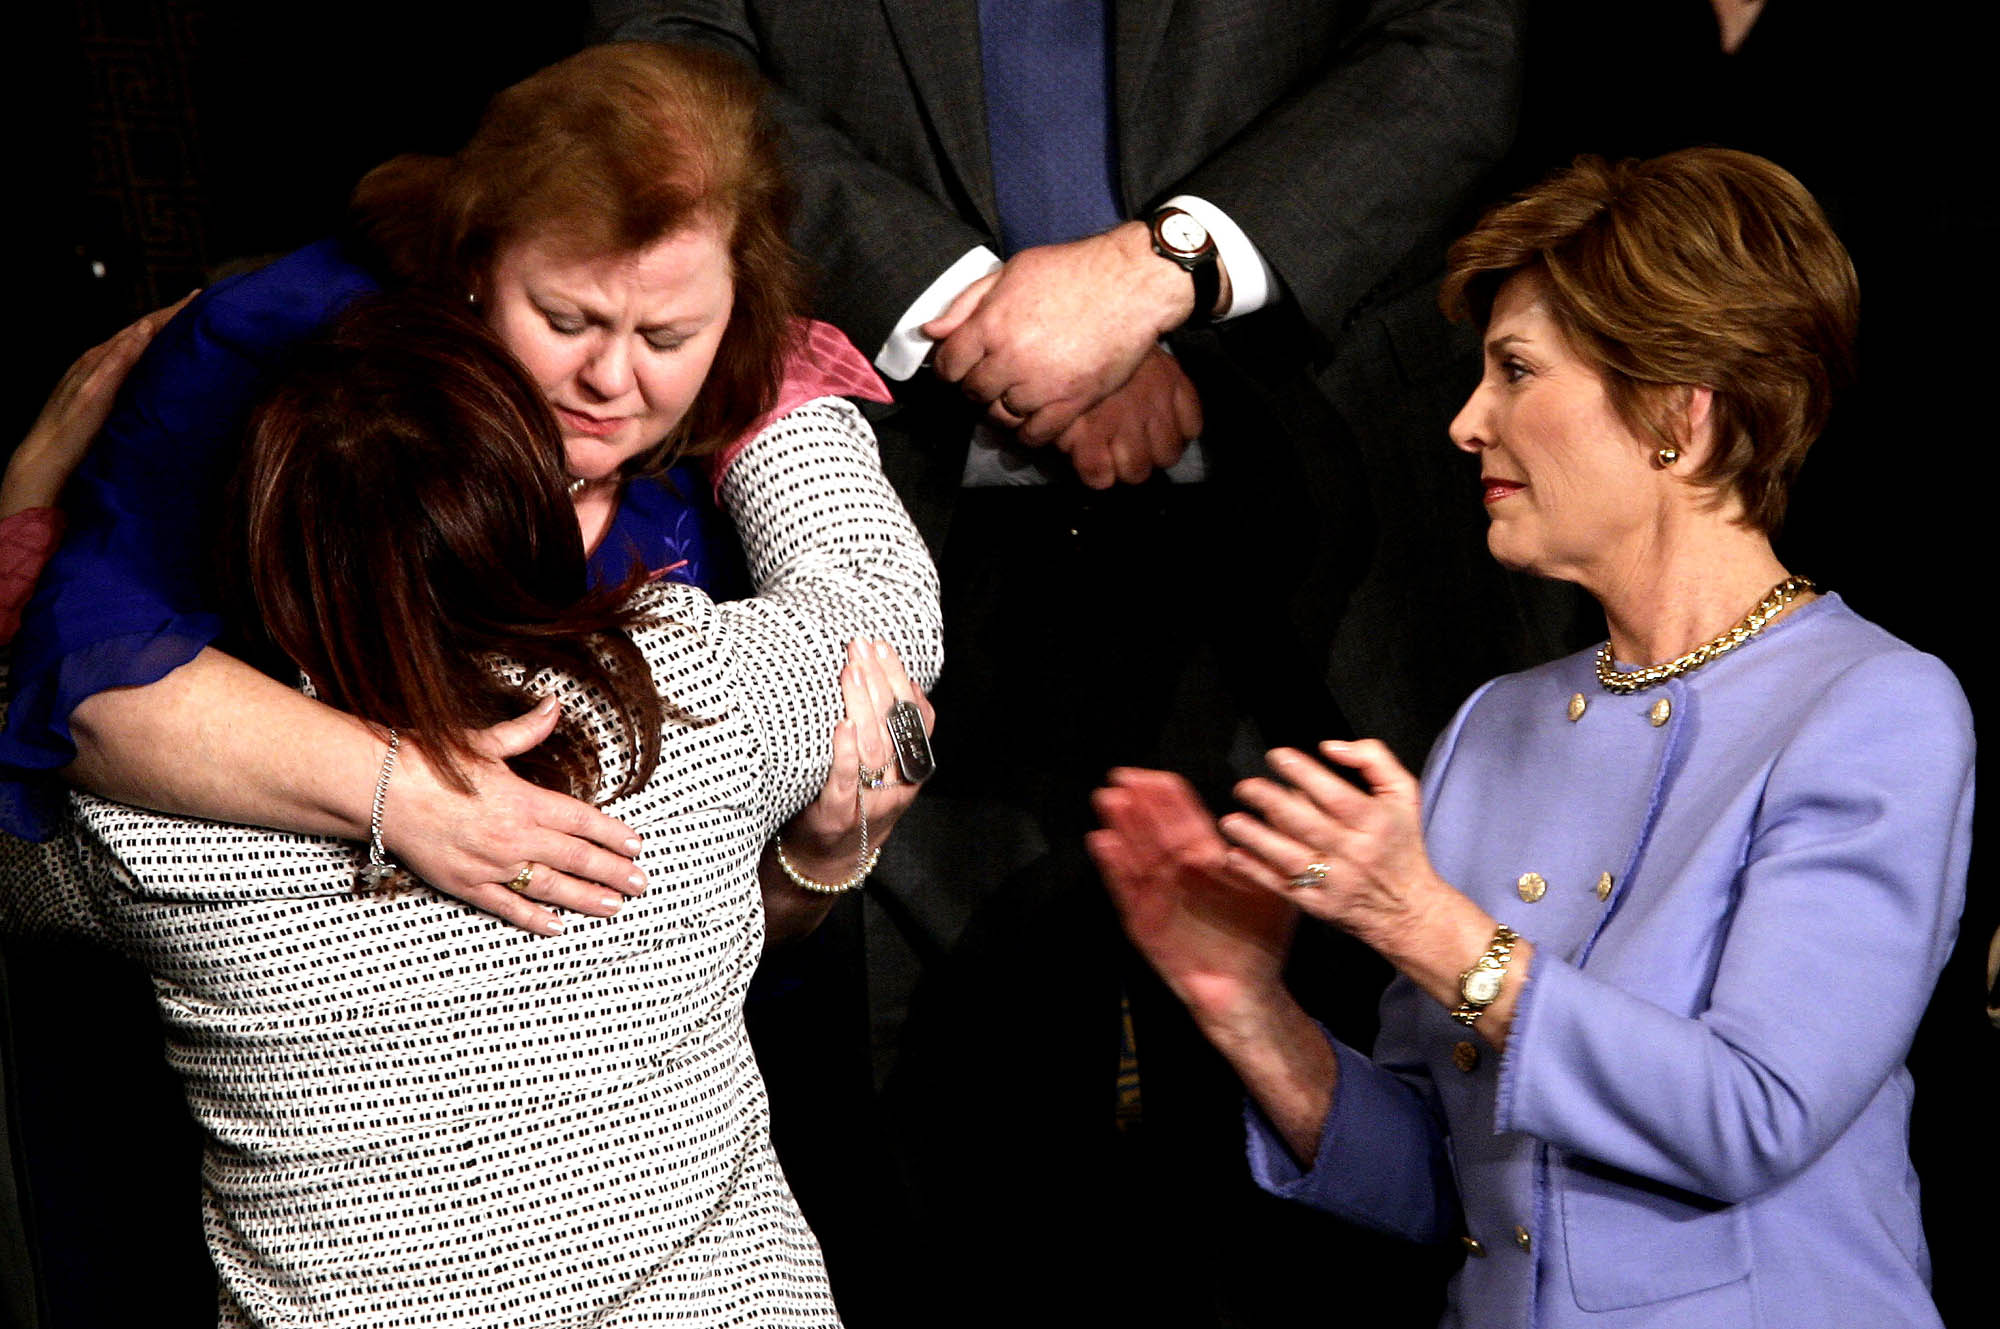 First lady Laura Bush, right, applauds as Safia Taleb al-Suhail, leader of the Iraqi Women's Political Council, back to camera, hugs Janet Norwood of Pflugerville, Texas, on Capitol Hill, Feb. 2, 2005. Norwood's son, Sgt. Byron Norwood, was killed in Iraq in Nov. 2004.